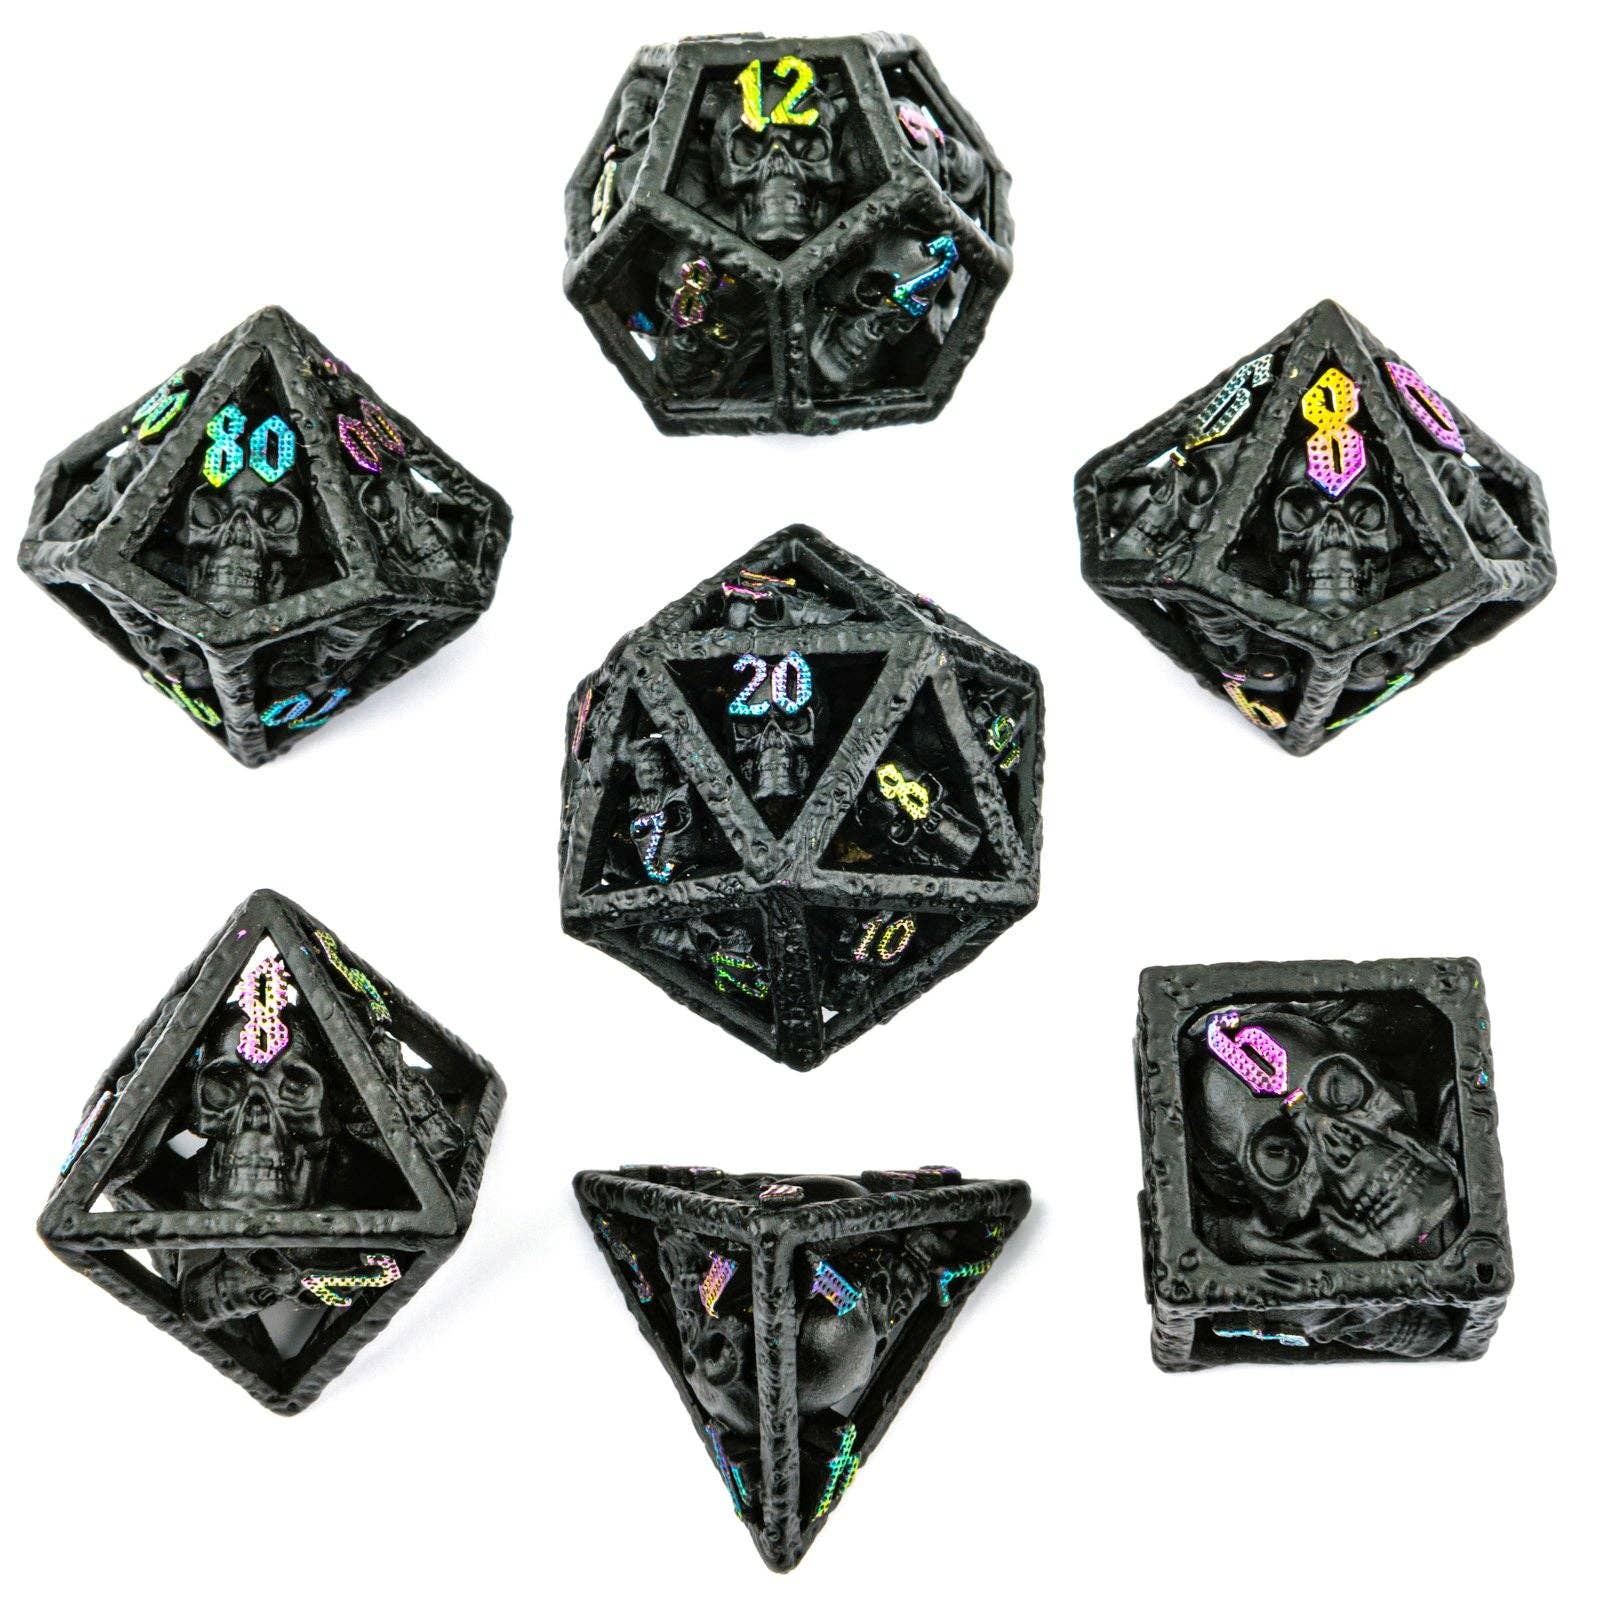 HY00162 Skull's Grin Hollow Metal Dice Set - Black with Chromatic - Bards & Cards